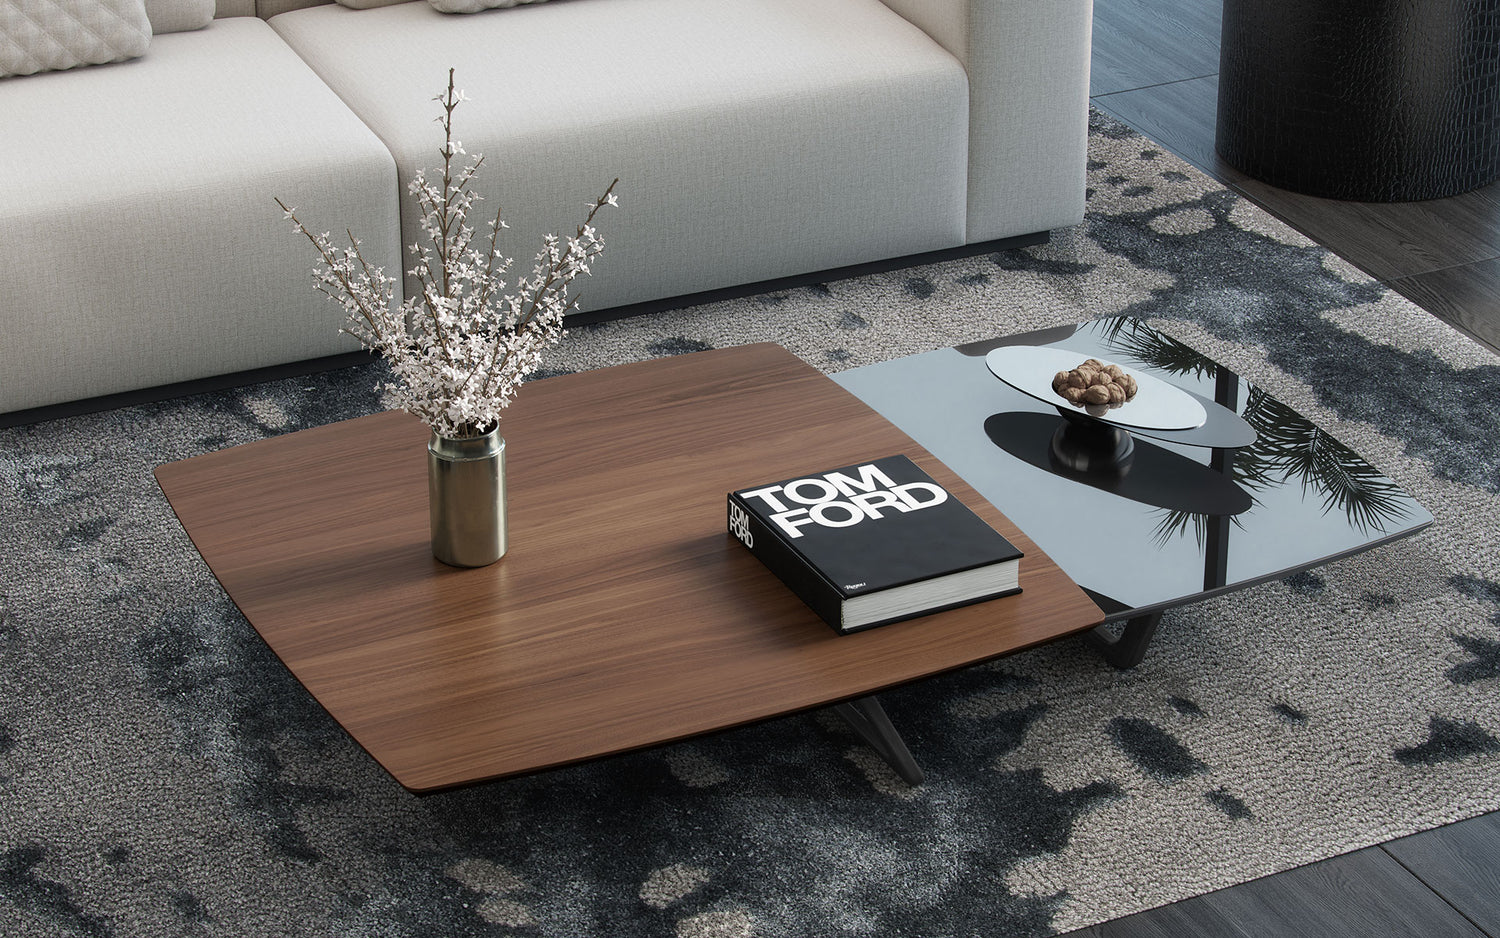 Elegant Home Decor You Should MAKE Instead of Buy, STACKED COFFEE TABLE  BOOKS